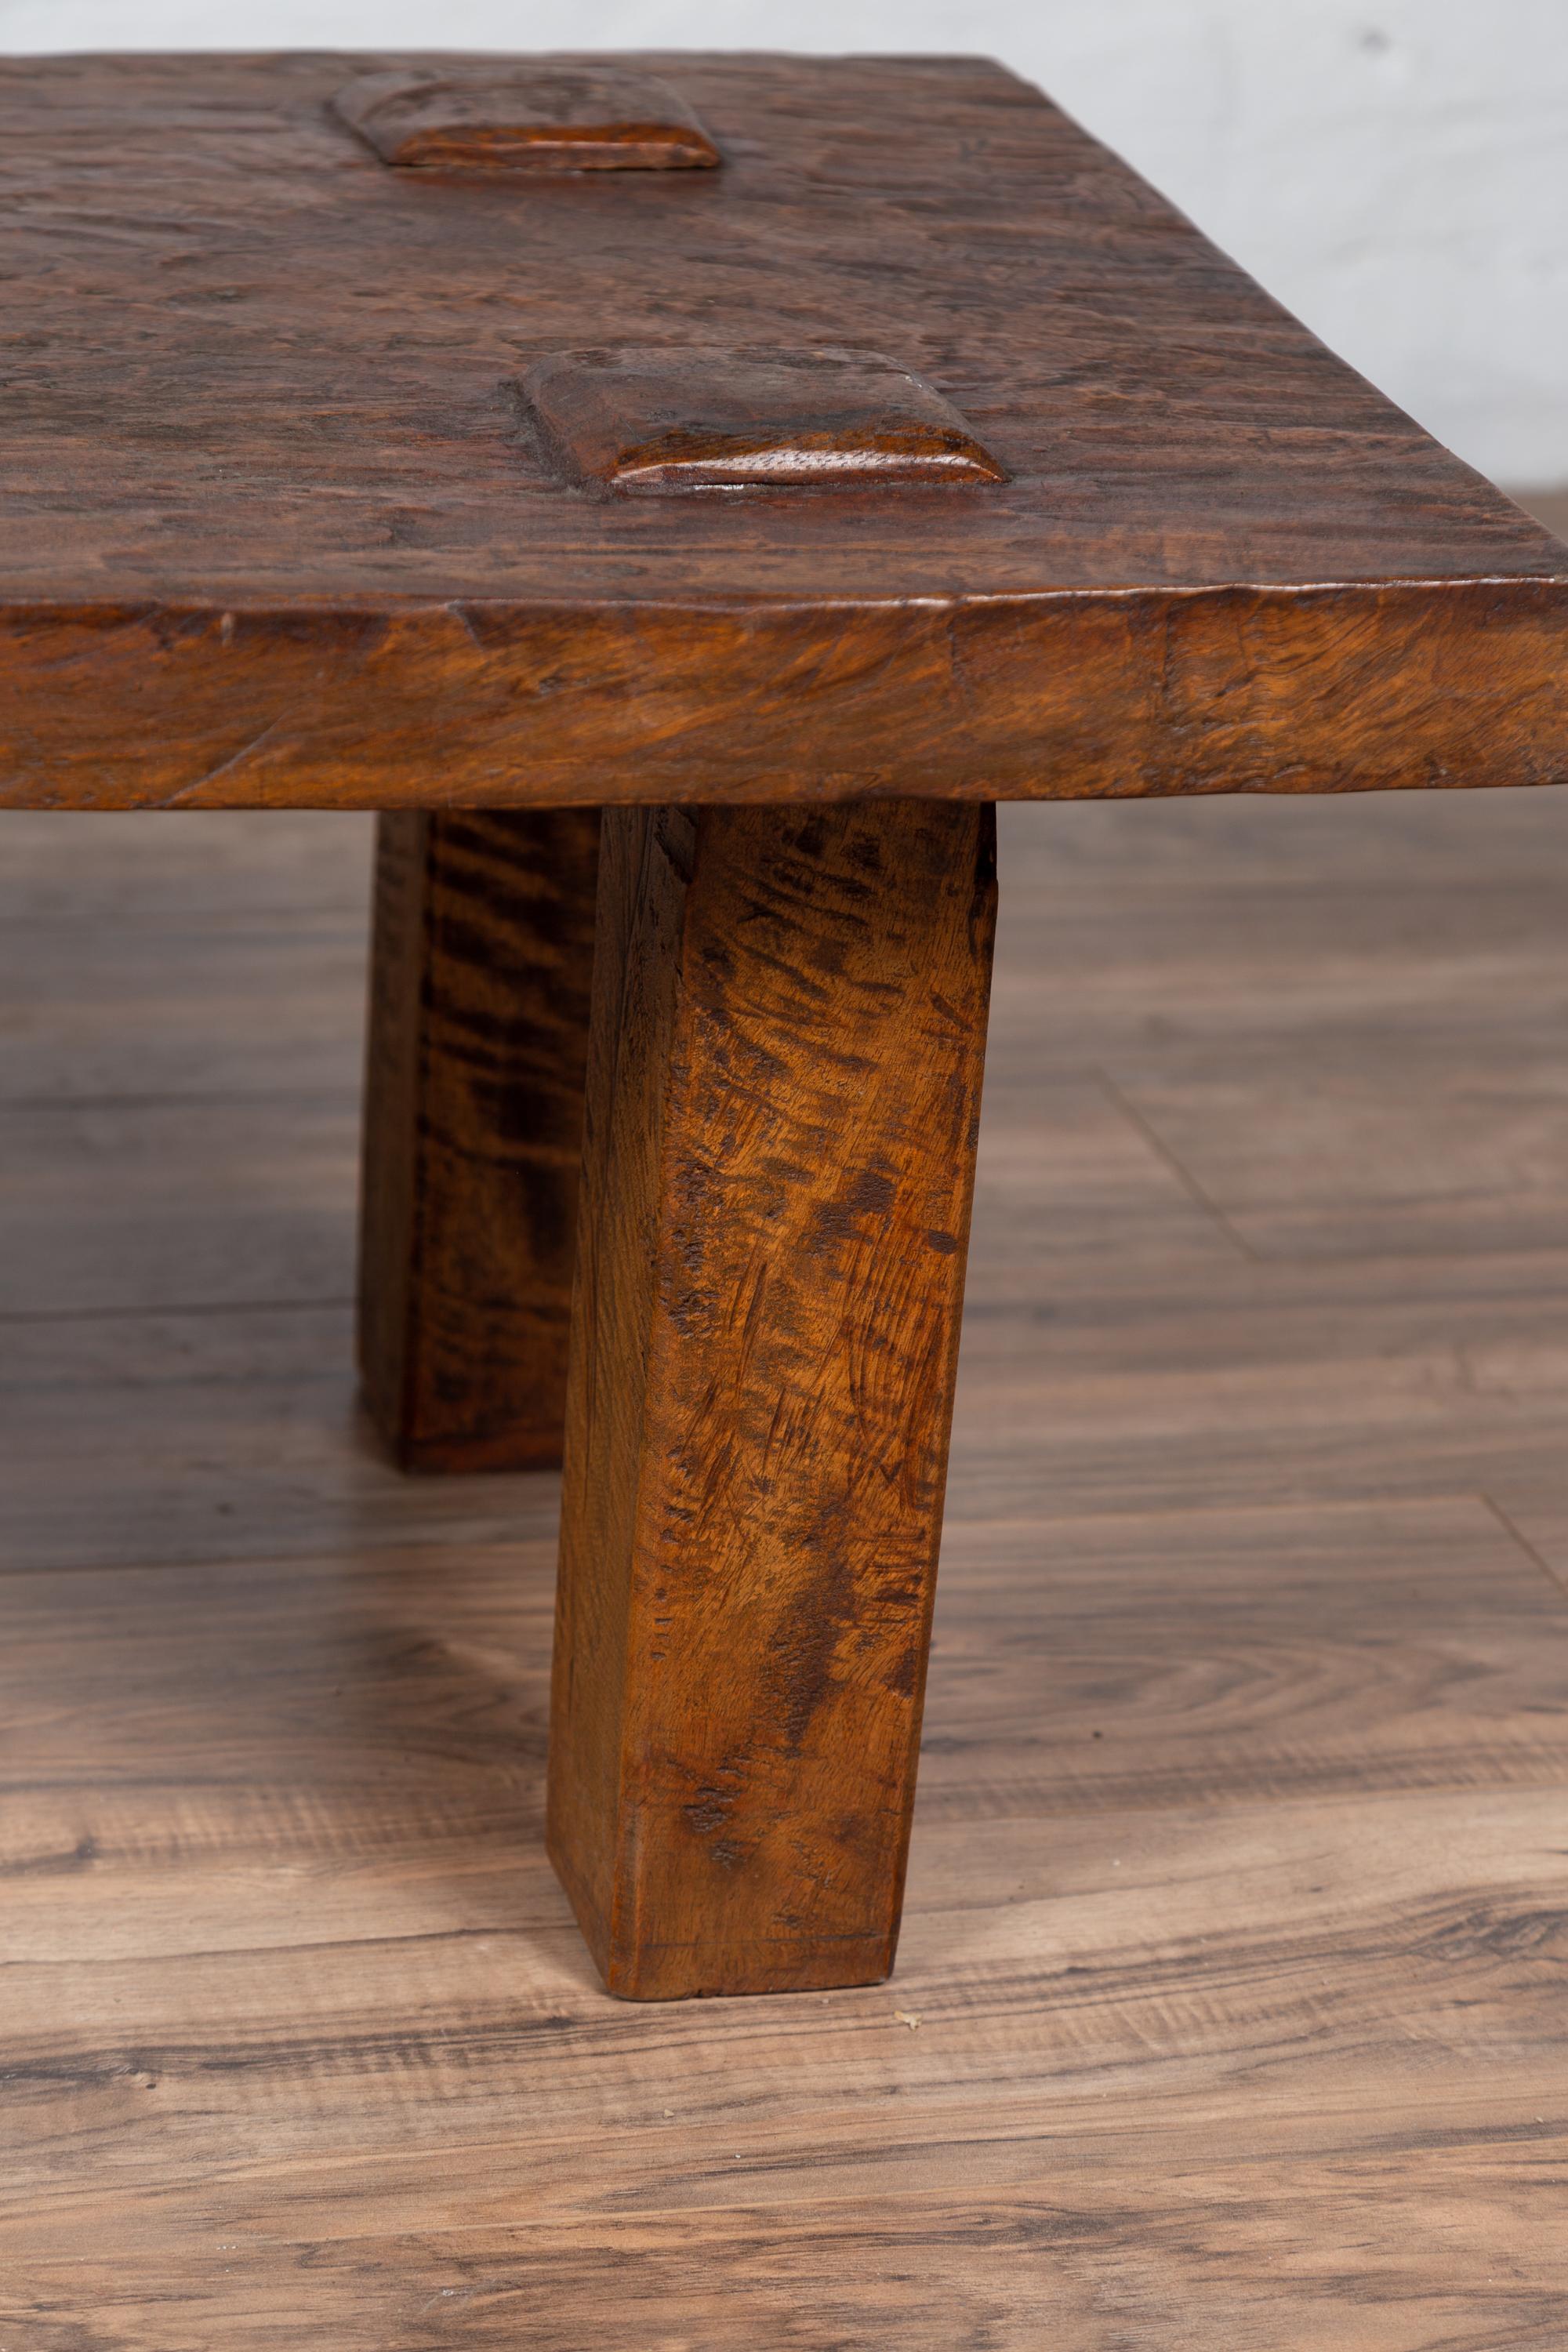 20th Century Vintage Indonesian Rustic Wooden Coffee Table with Square Legs and Raised Joints